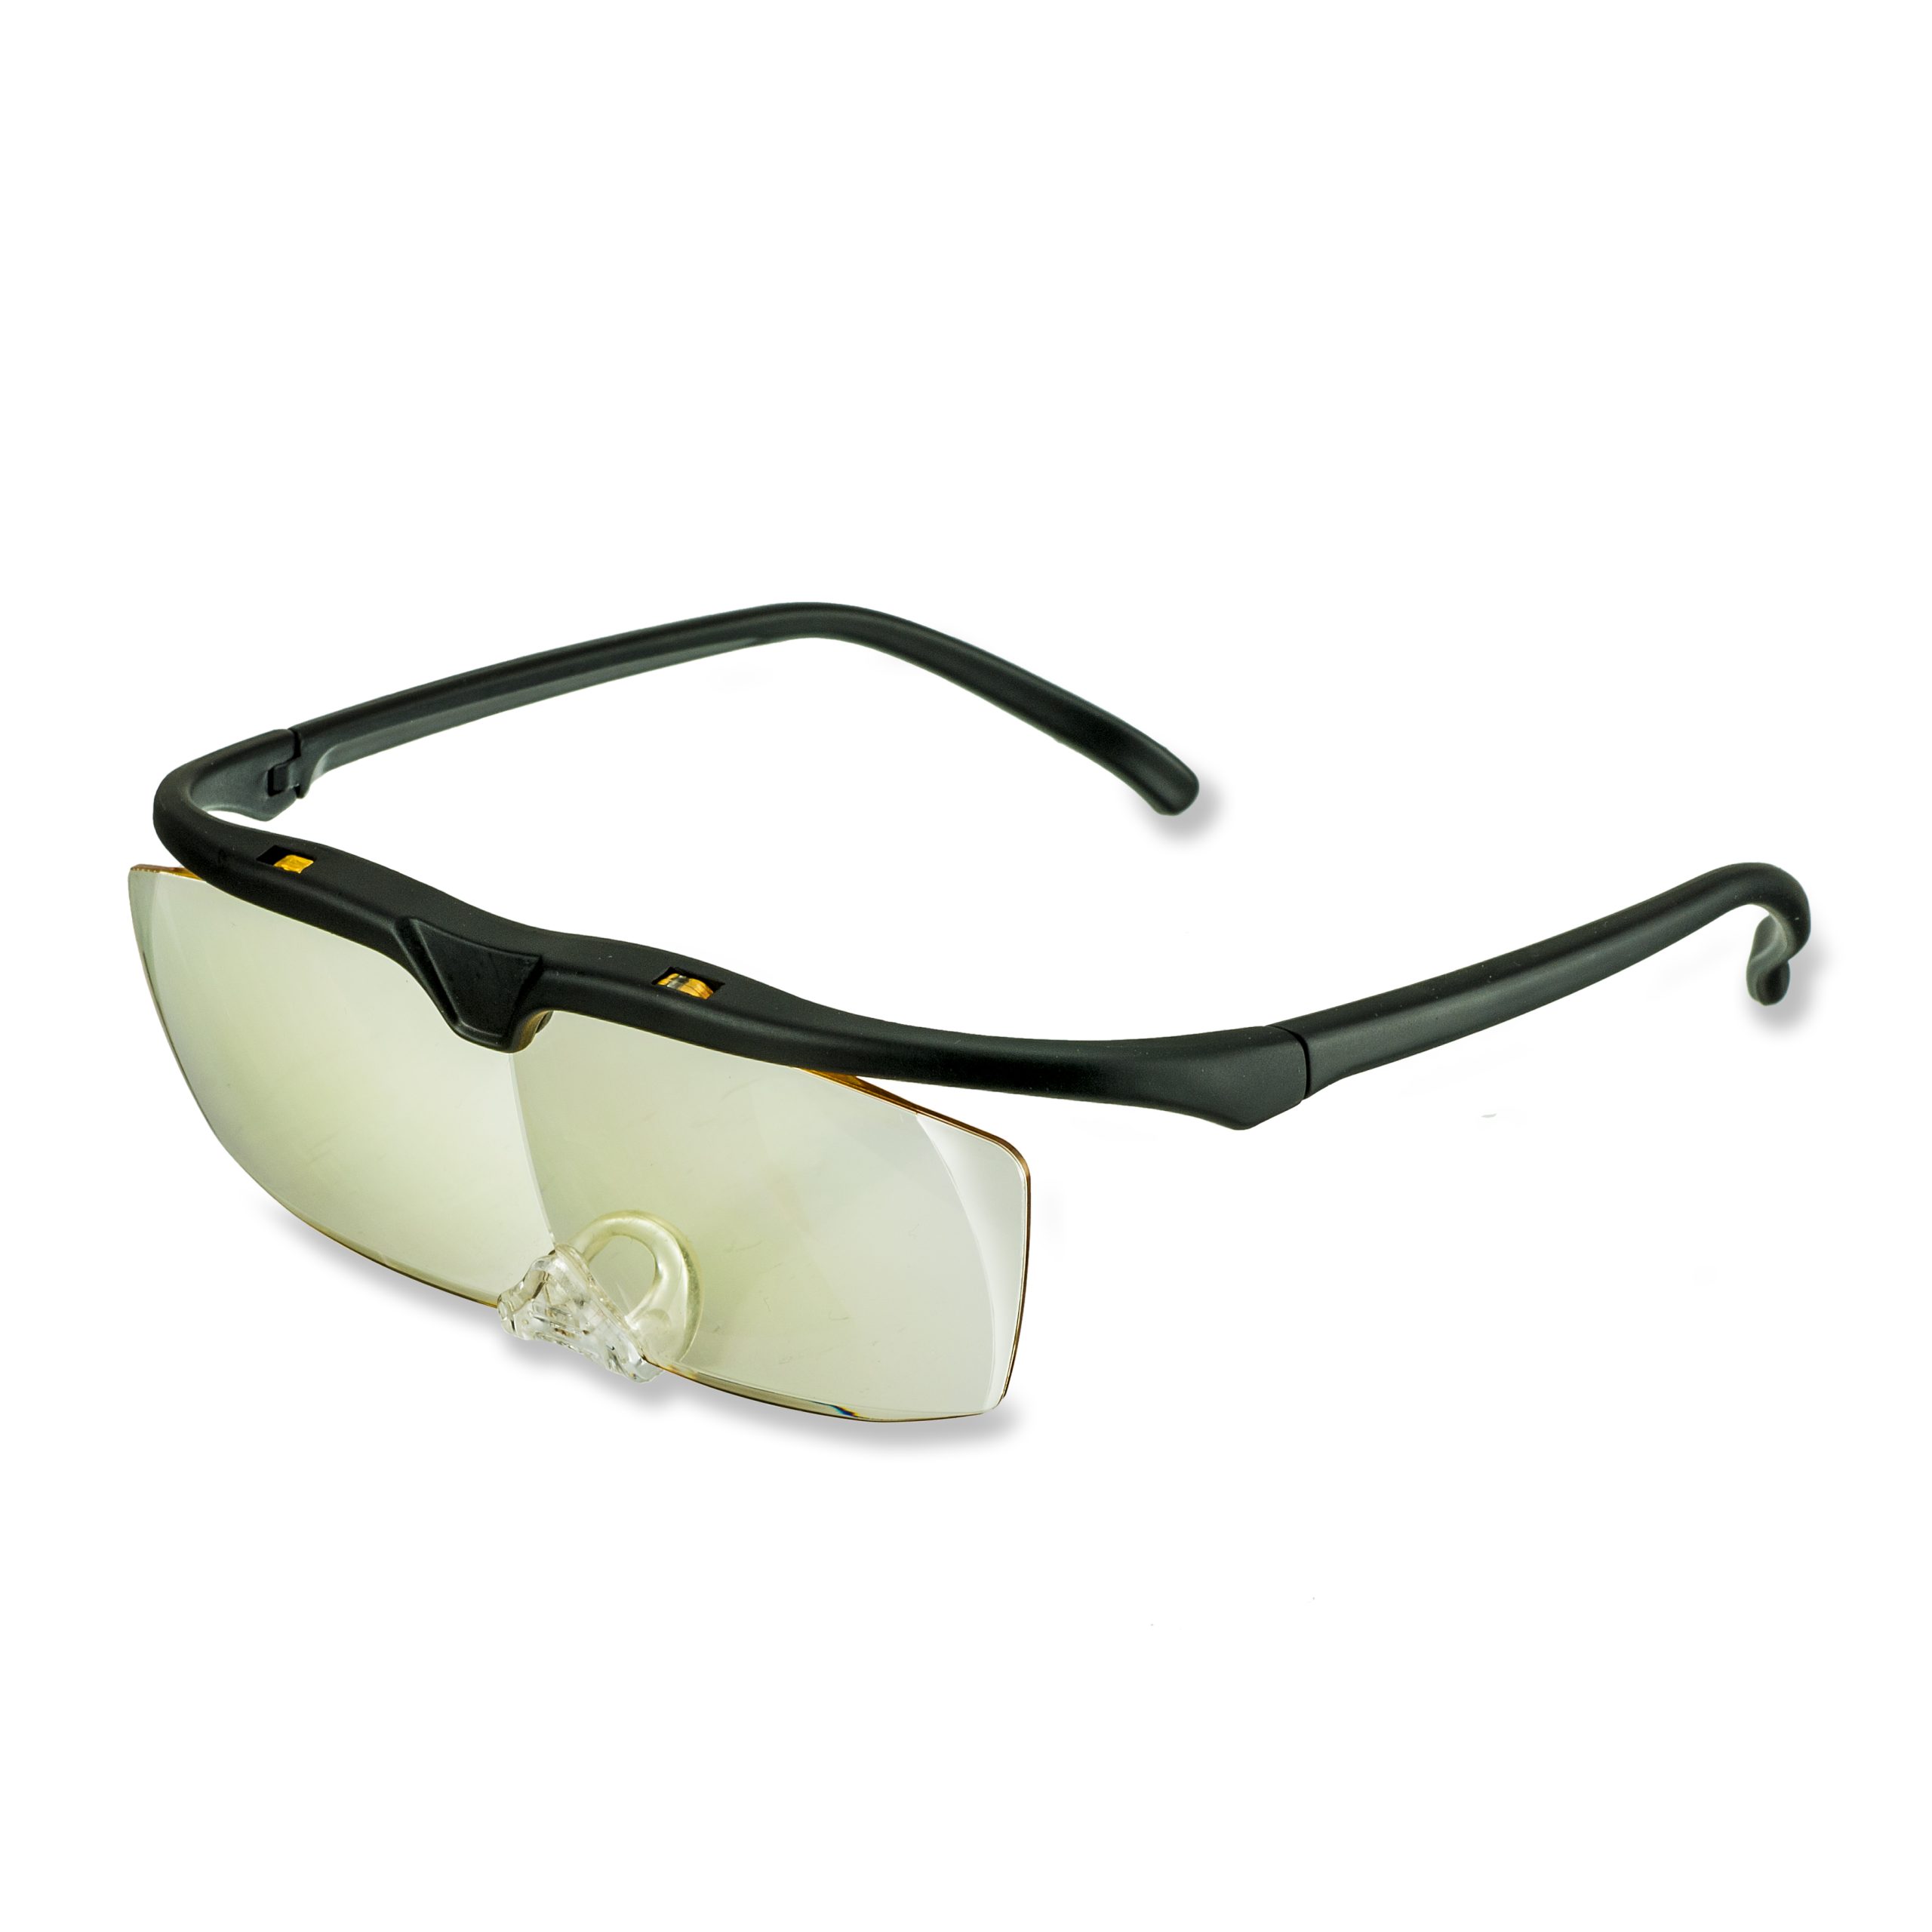 Carson Cp-12 Magnifying Hobby Glasses (1.8x)